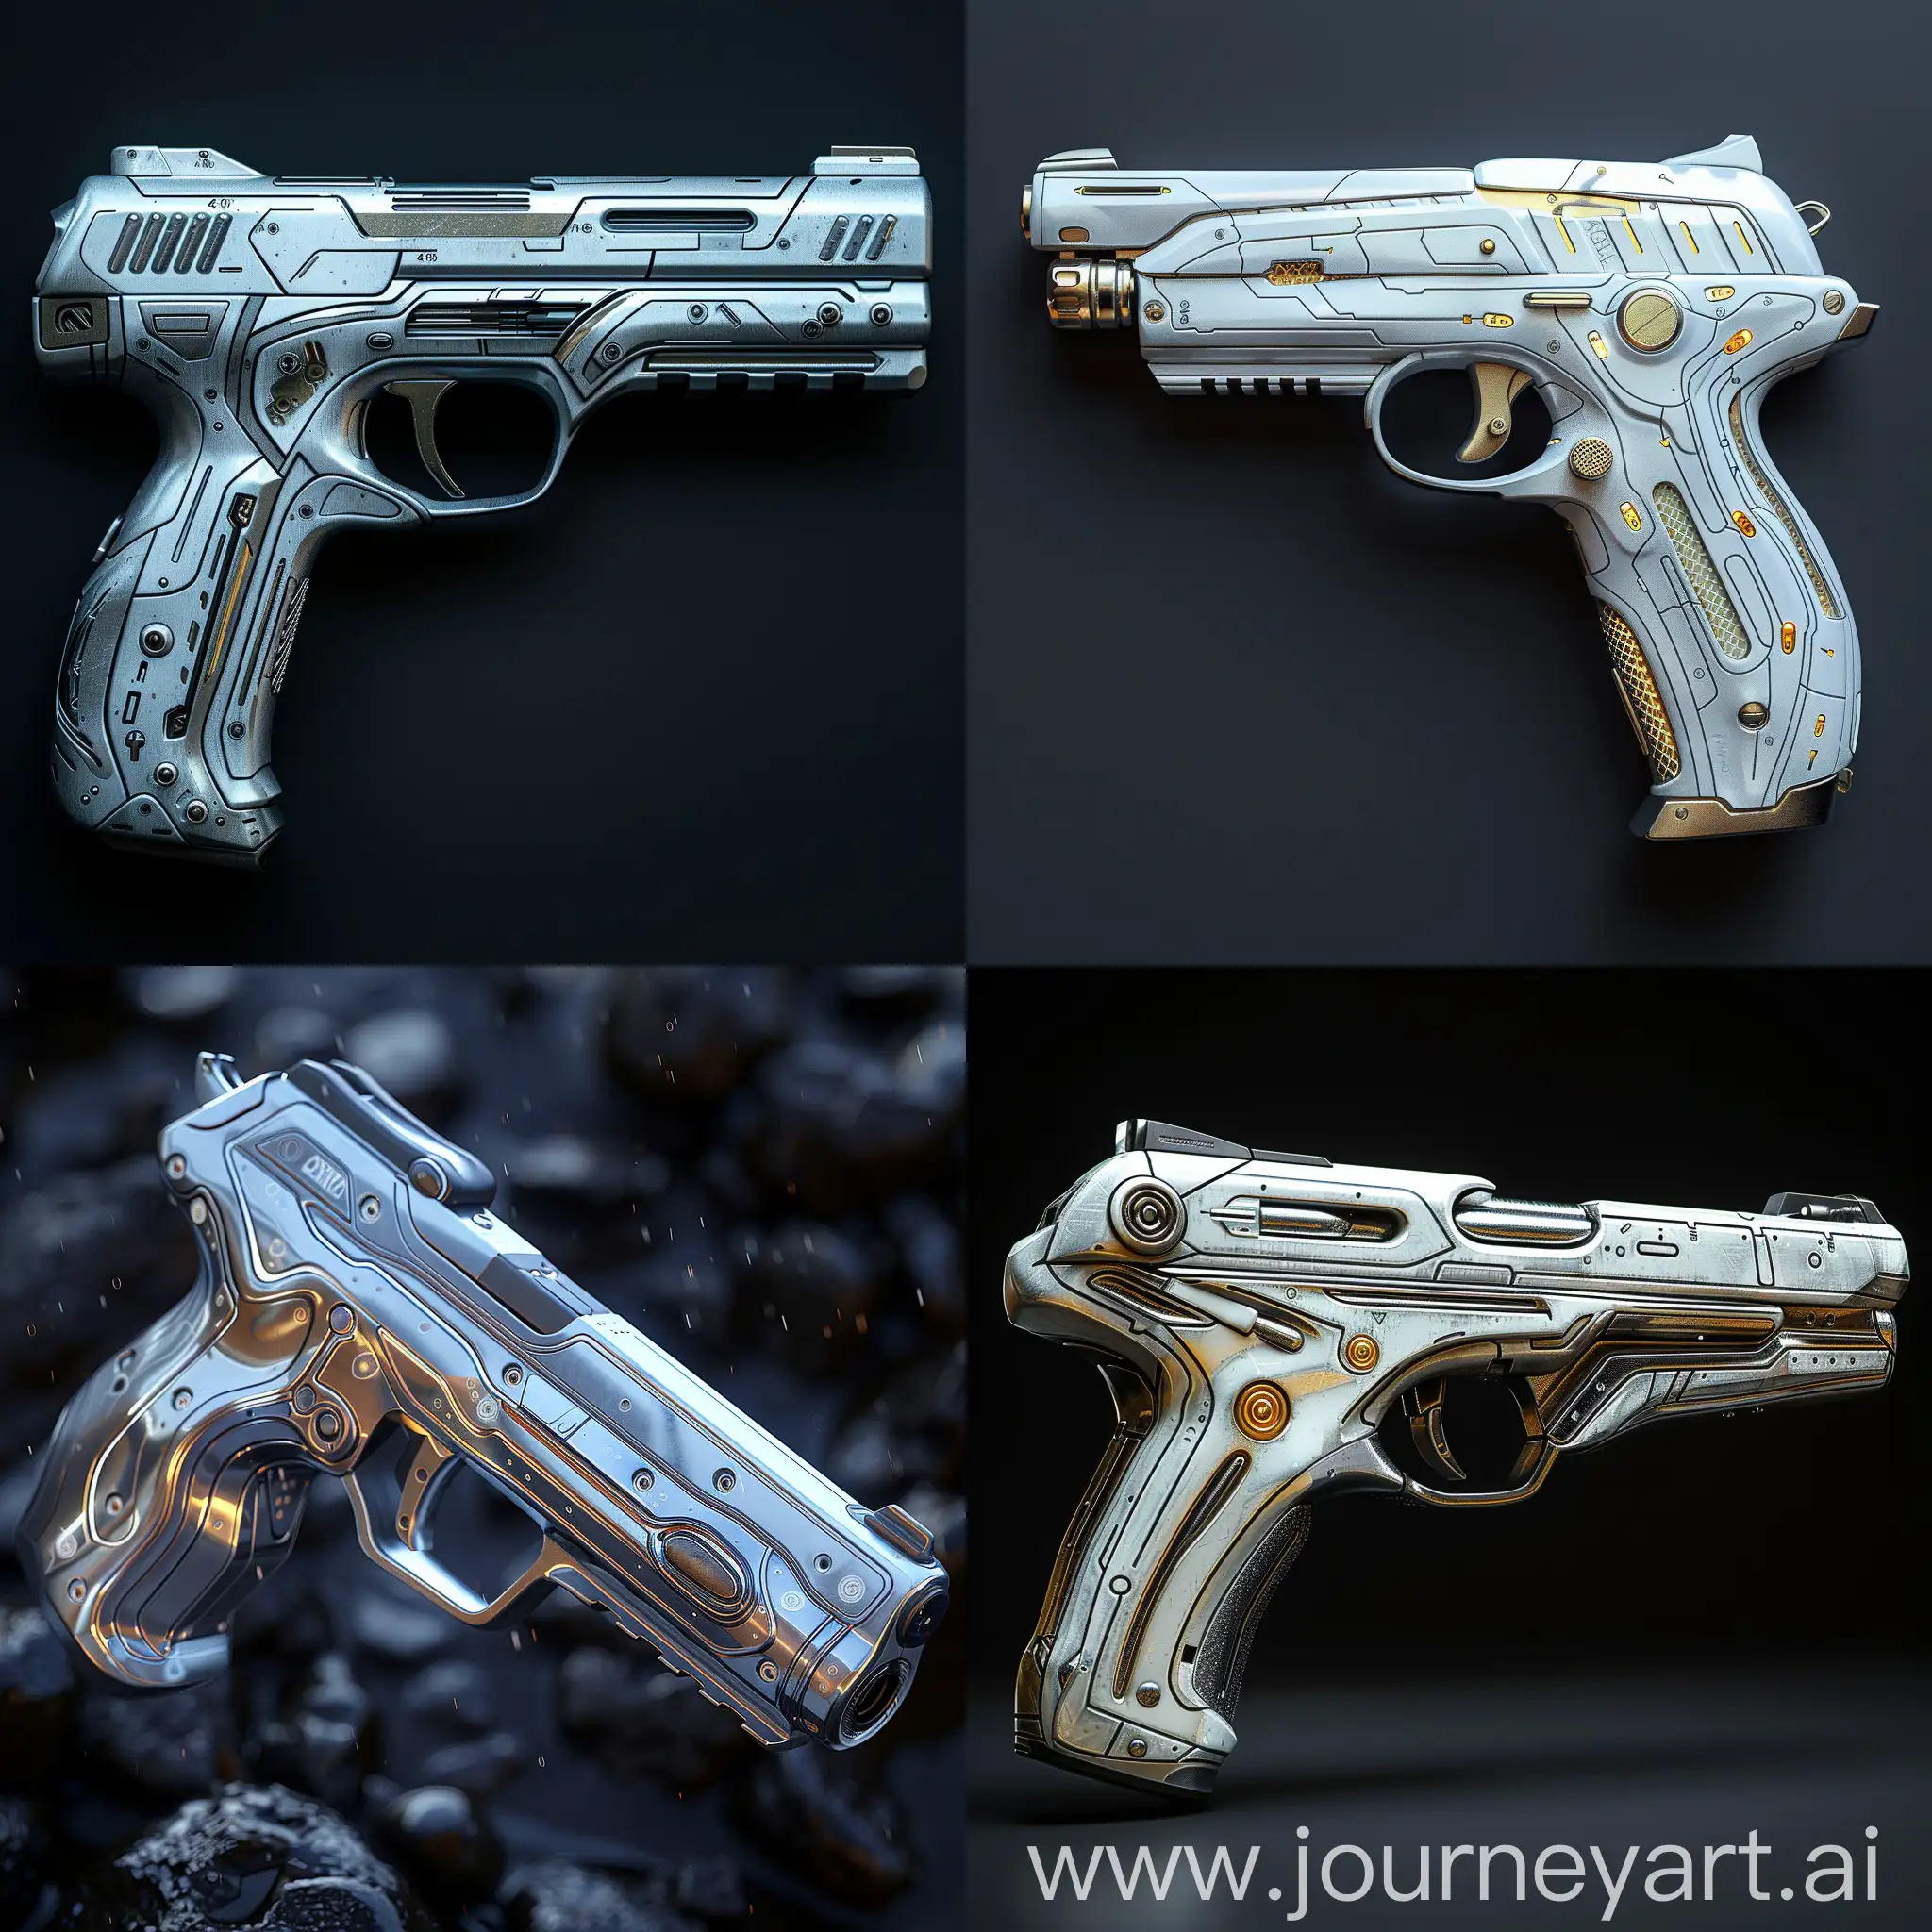 Futuristic-Stainless-Steel-Pistol-with-Graphene-Smart-Materials-High-Tech-Weapon-for-Octane-Render